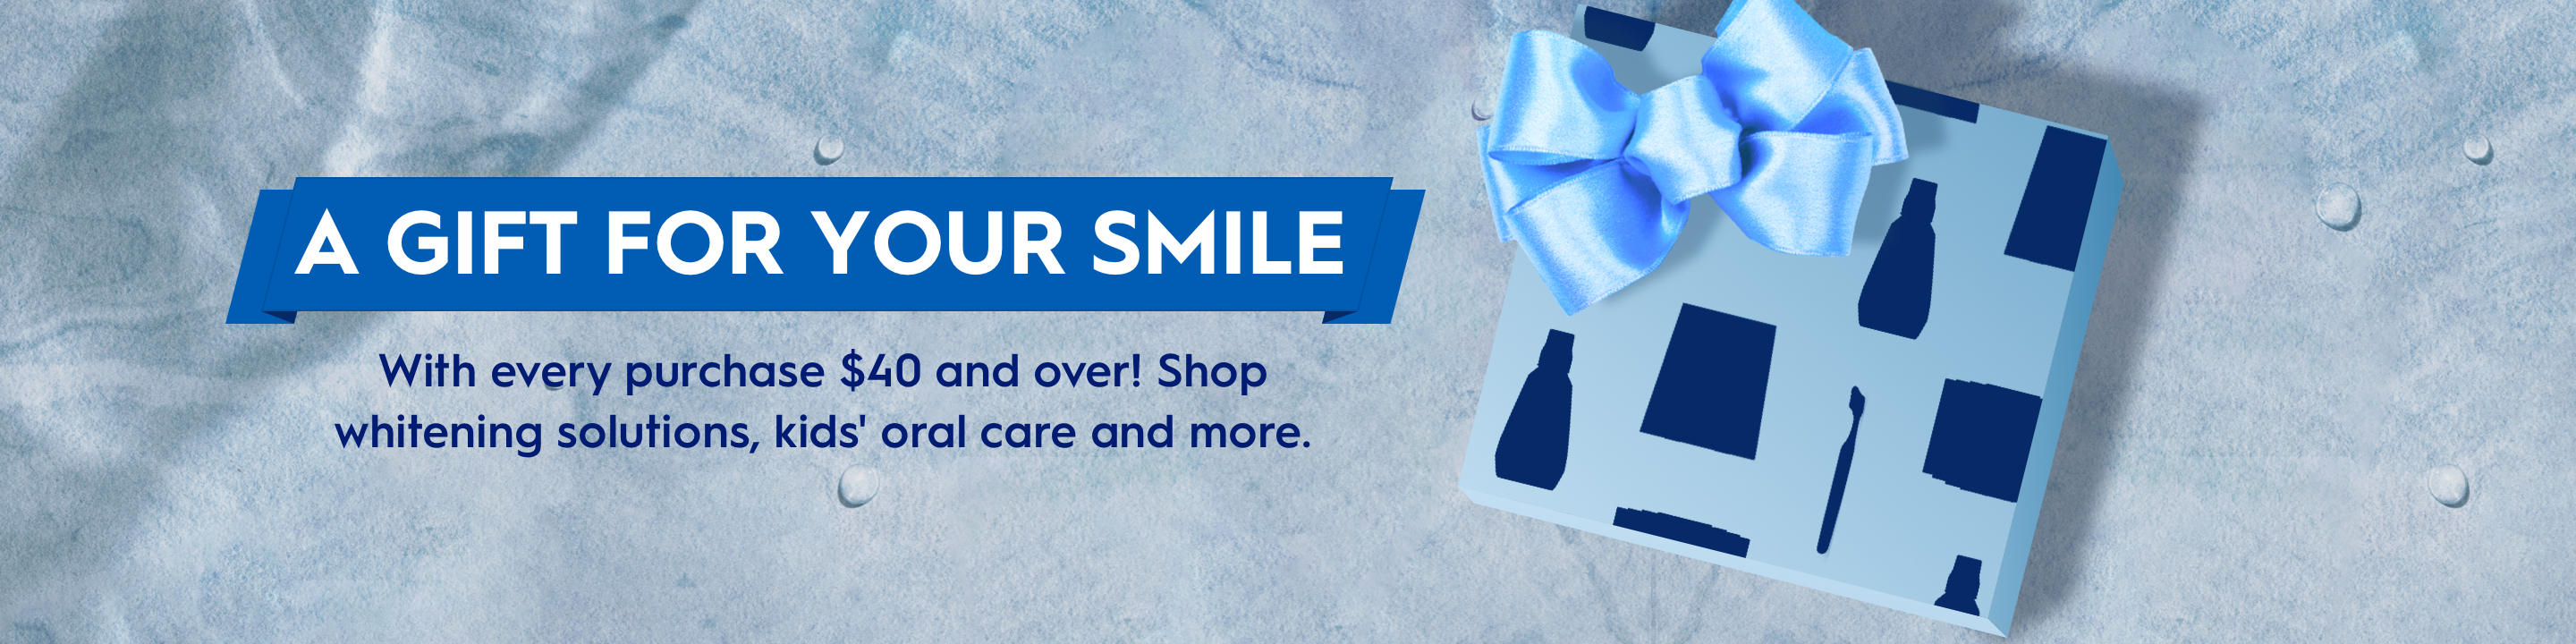 A gift for your smile with every purchase of $40 and over!